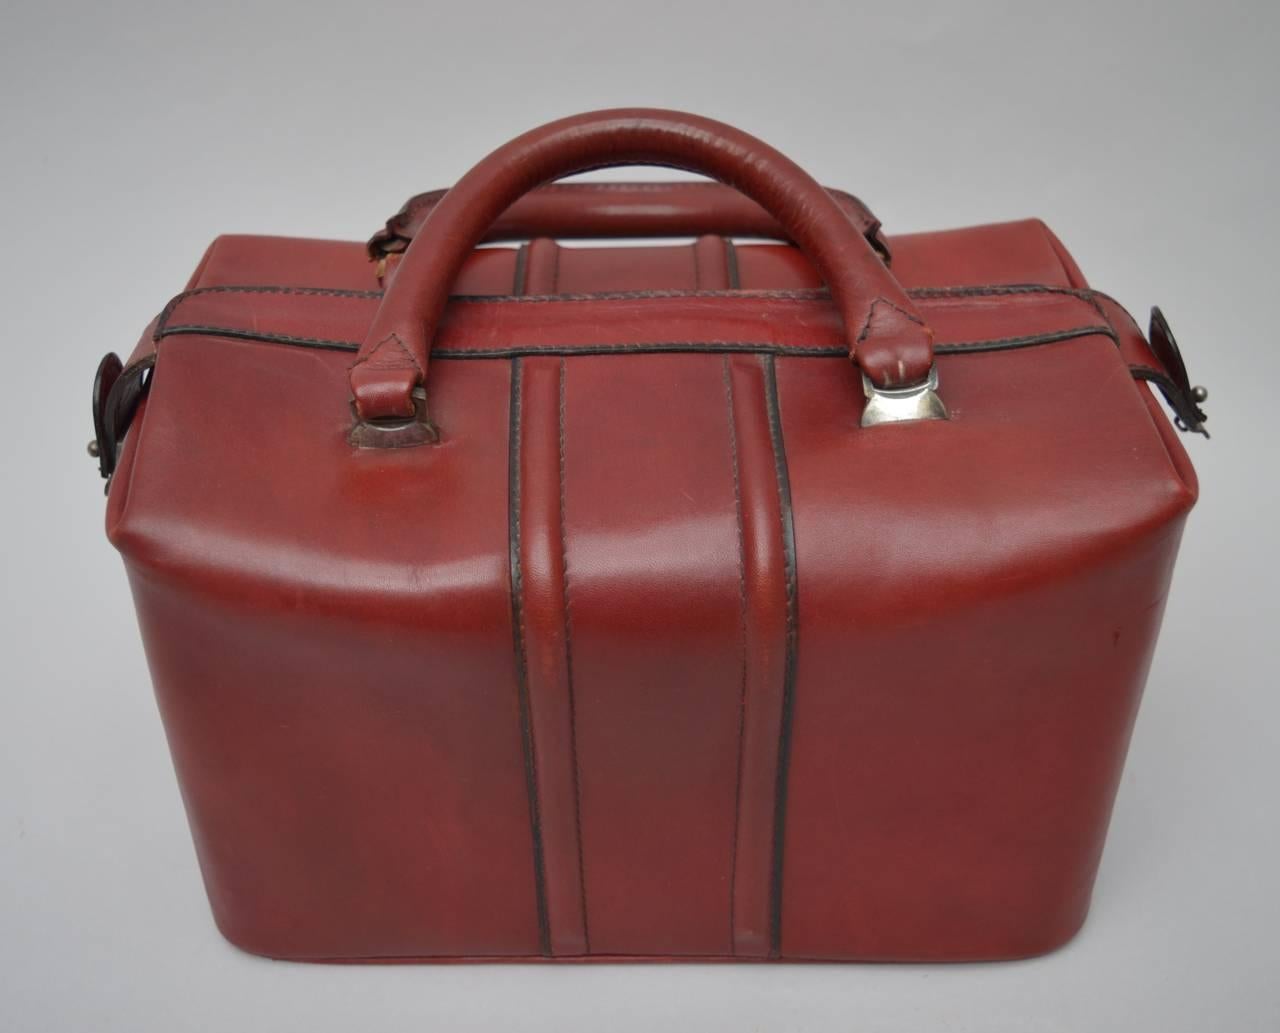 This vintage Italian leather satchel bag is in the perfect blood red color. The interior is lined in supple natural colored calfskin with a red leather strip to hold bottles and one zippered pocket. Still retains the 